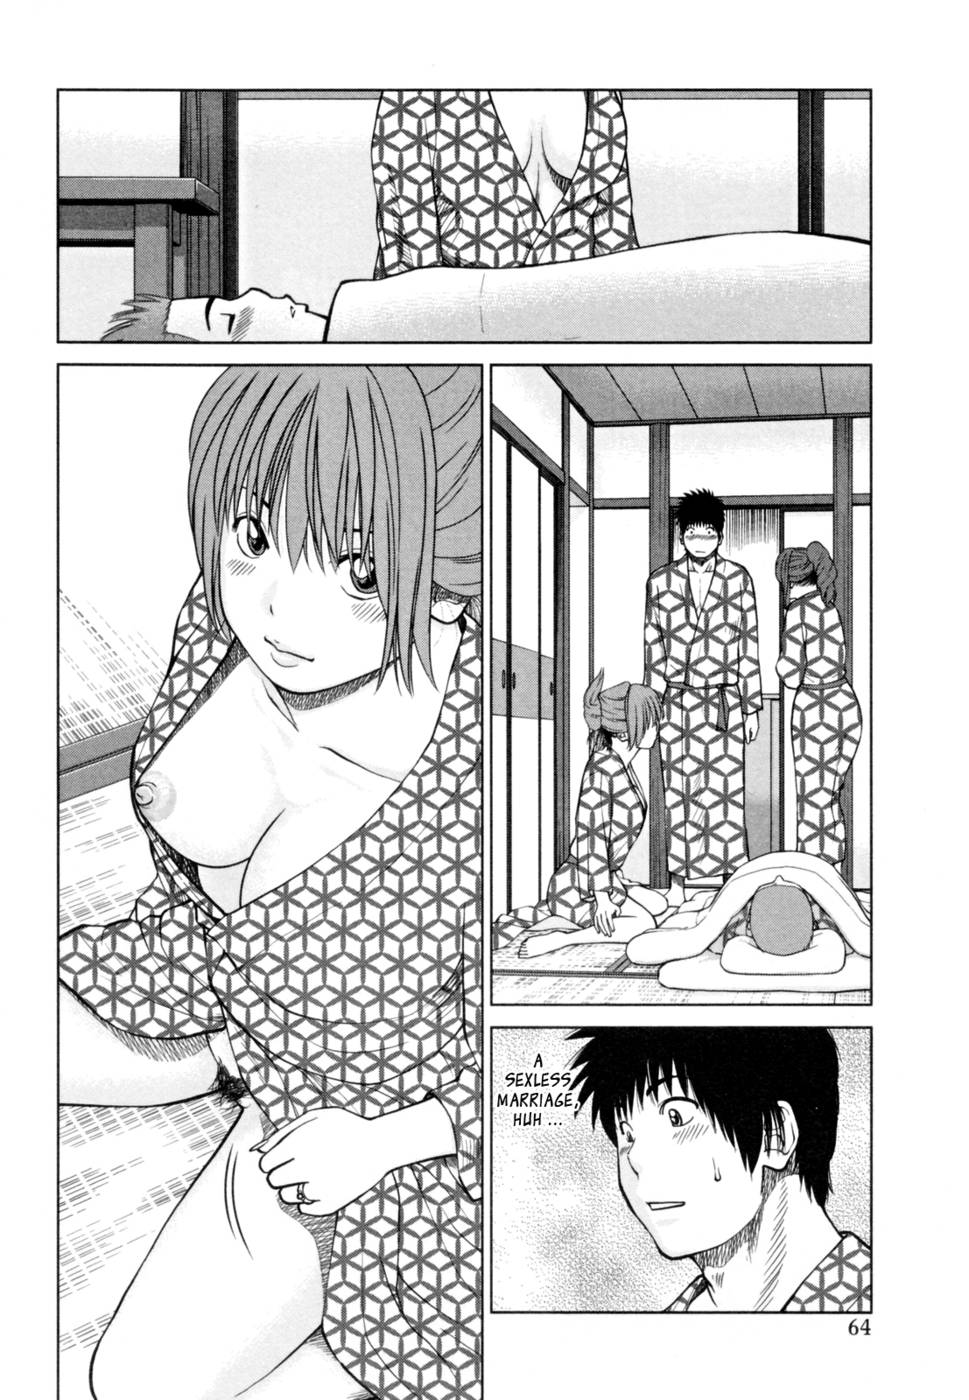 Hentai Manga Comic-32 Year Old Unsatisfied Wife-Chapter 4-Hot Spring Get-Together-A Friend's Wife-2